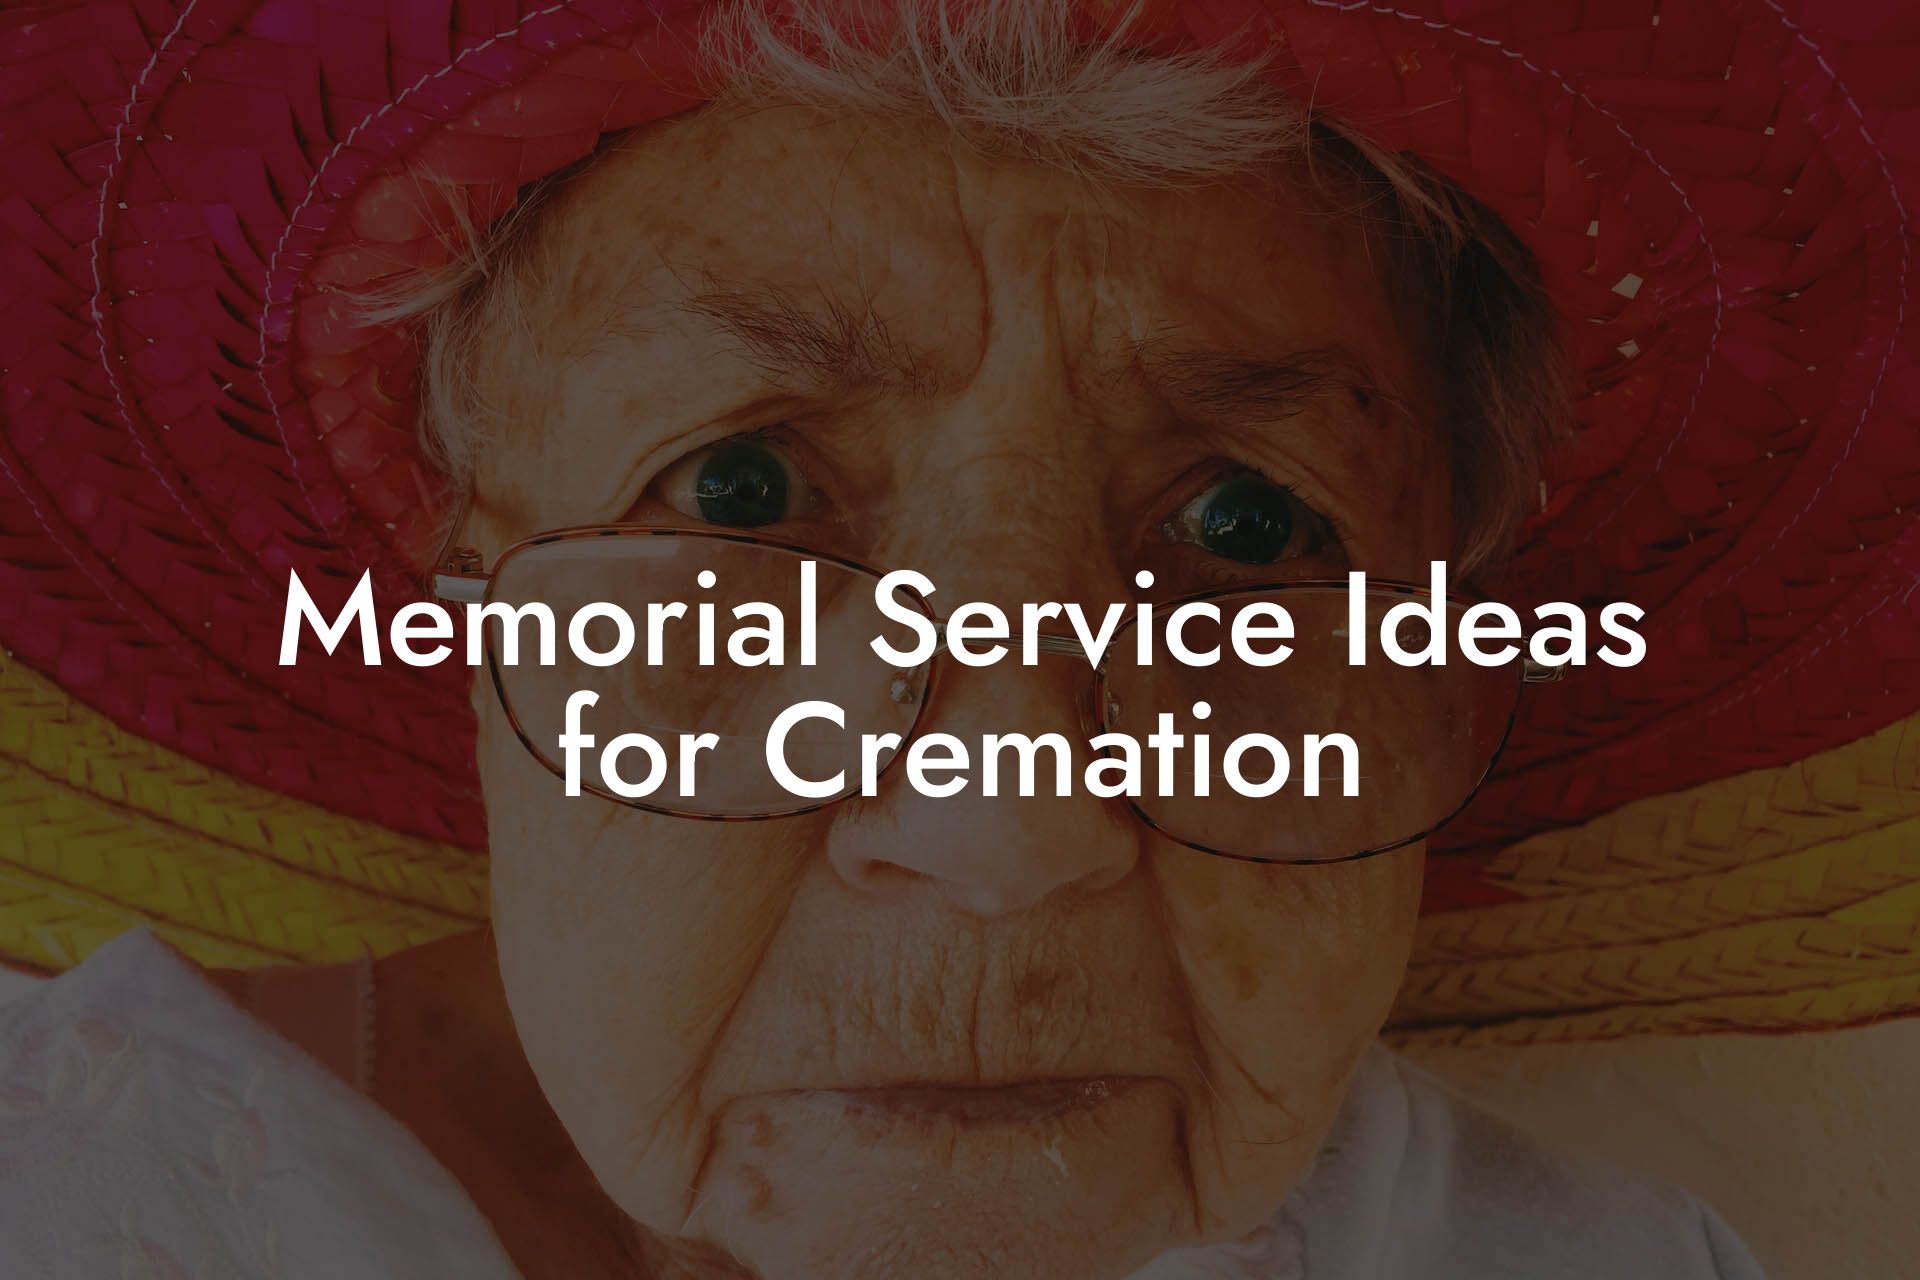 Memorial Service Ideas for Cremation